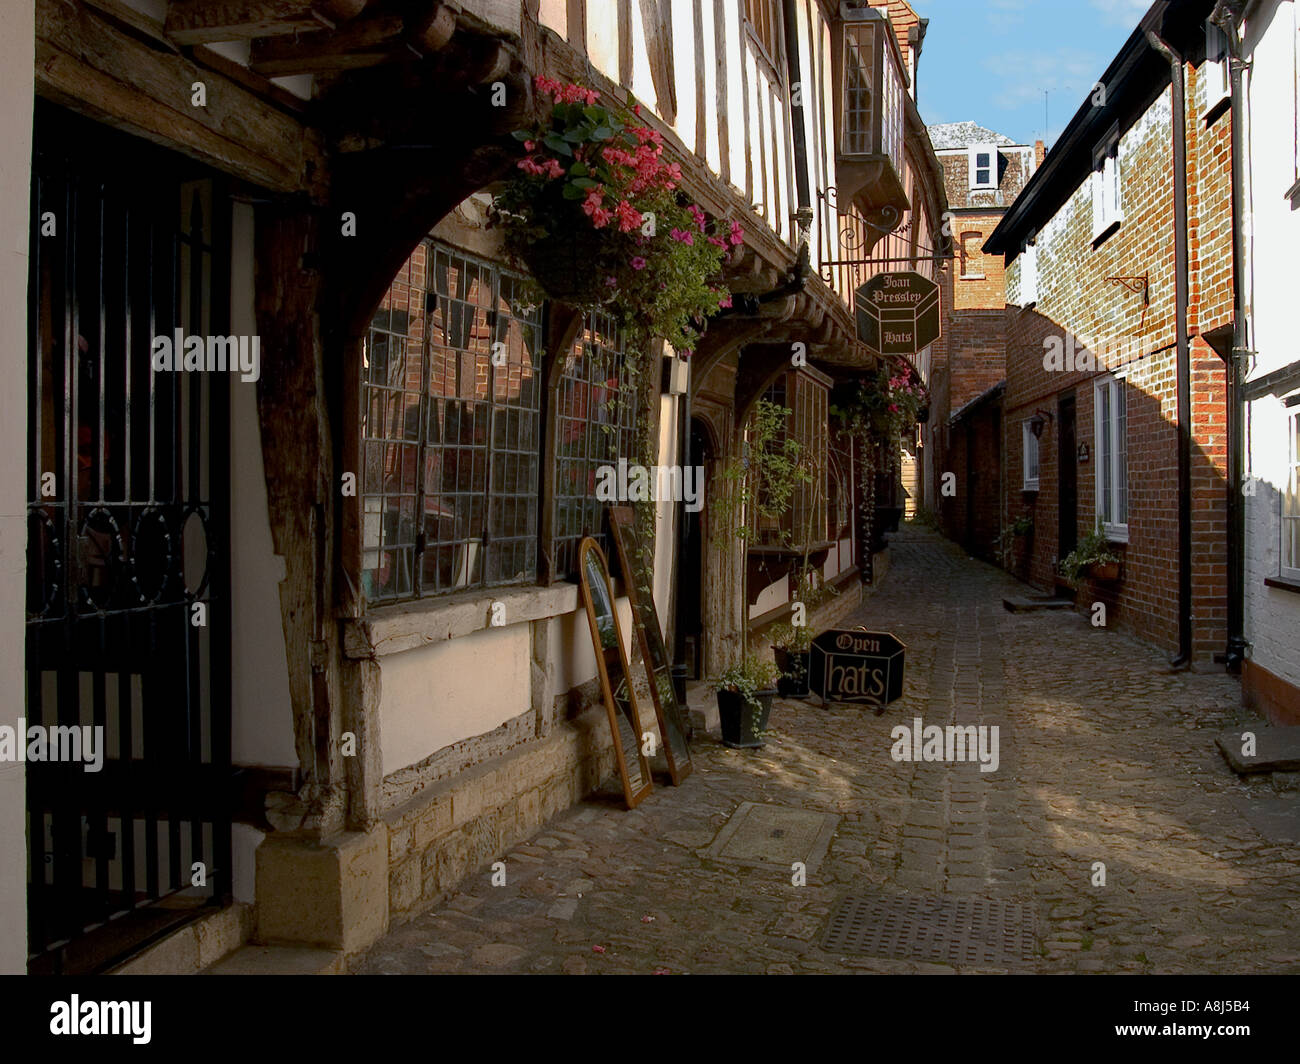 St Johns Alley featuring 15th century timber framed buildings on left, red brick houses and white painted frontage to right, Devizes, Wiltshire, UK Stock Photo